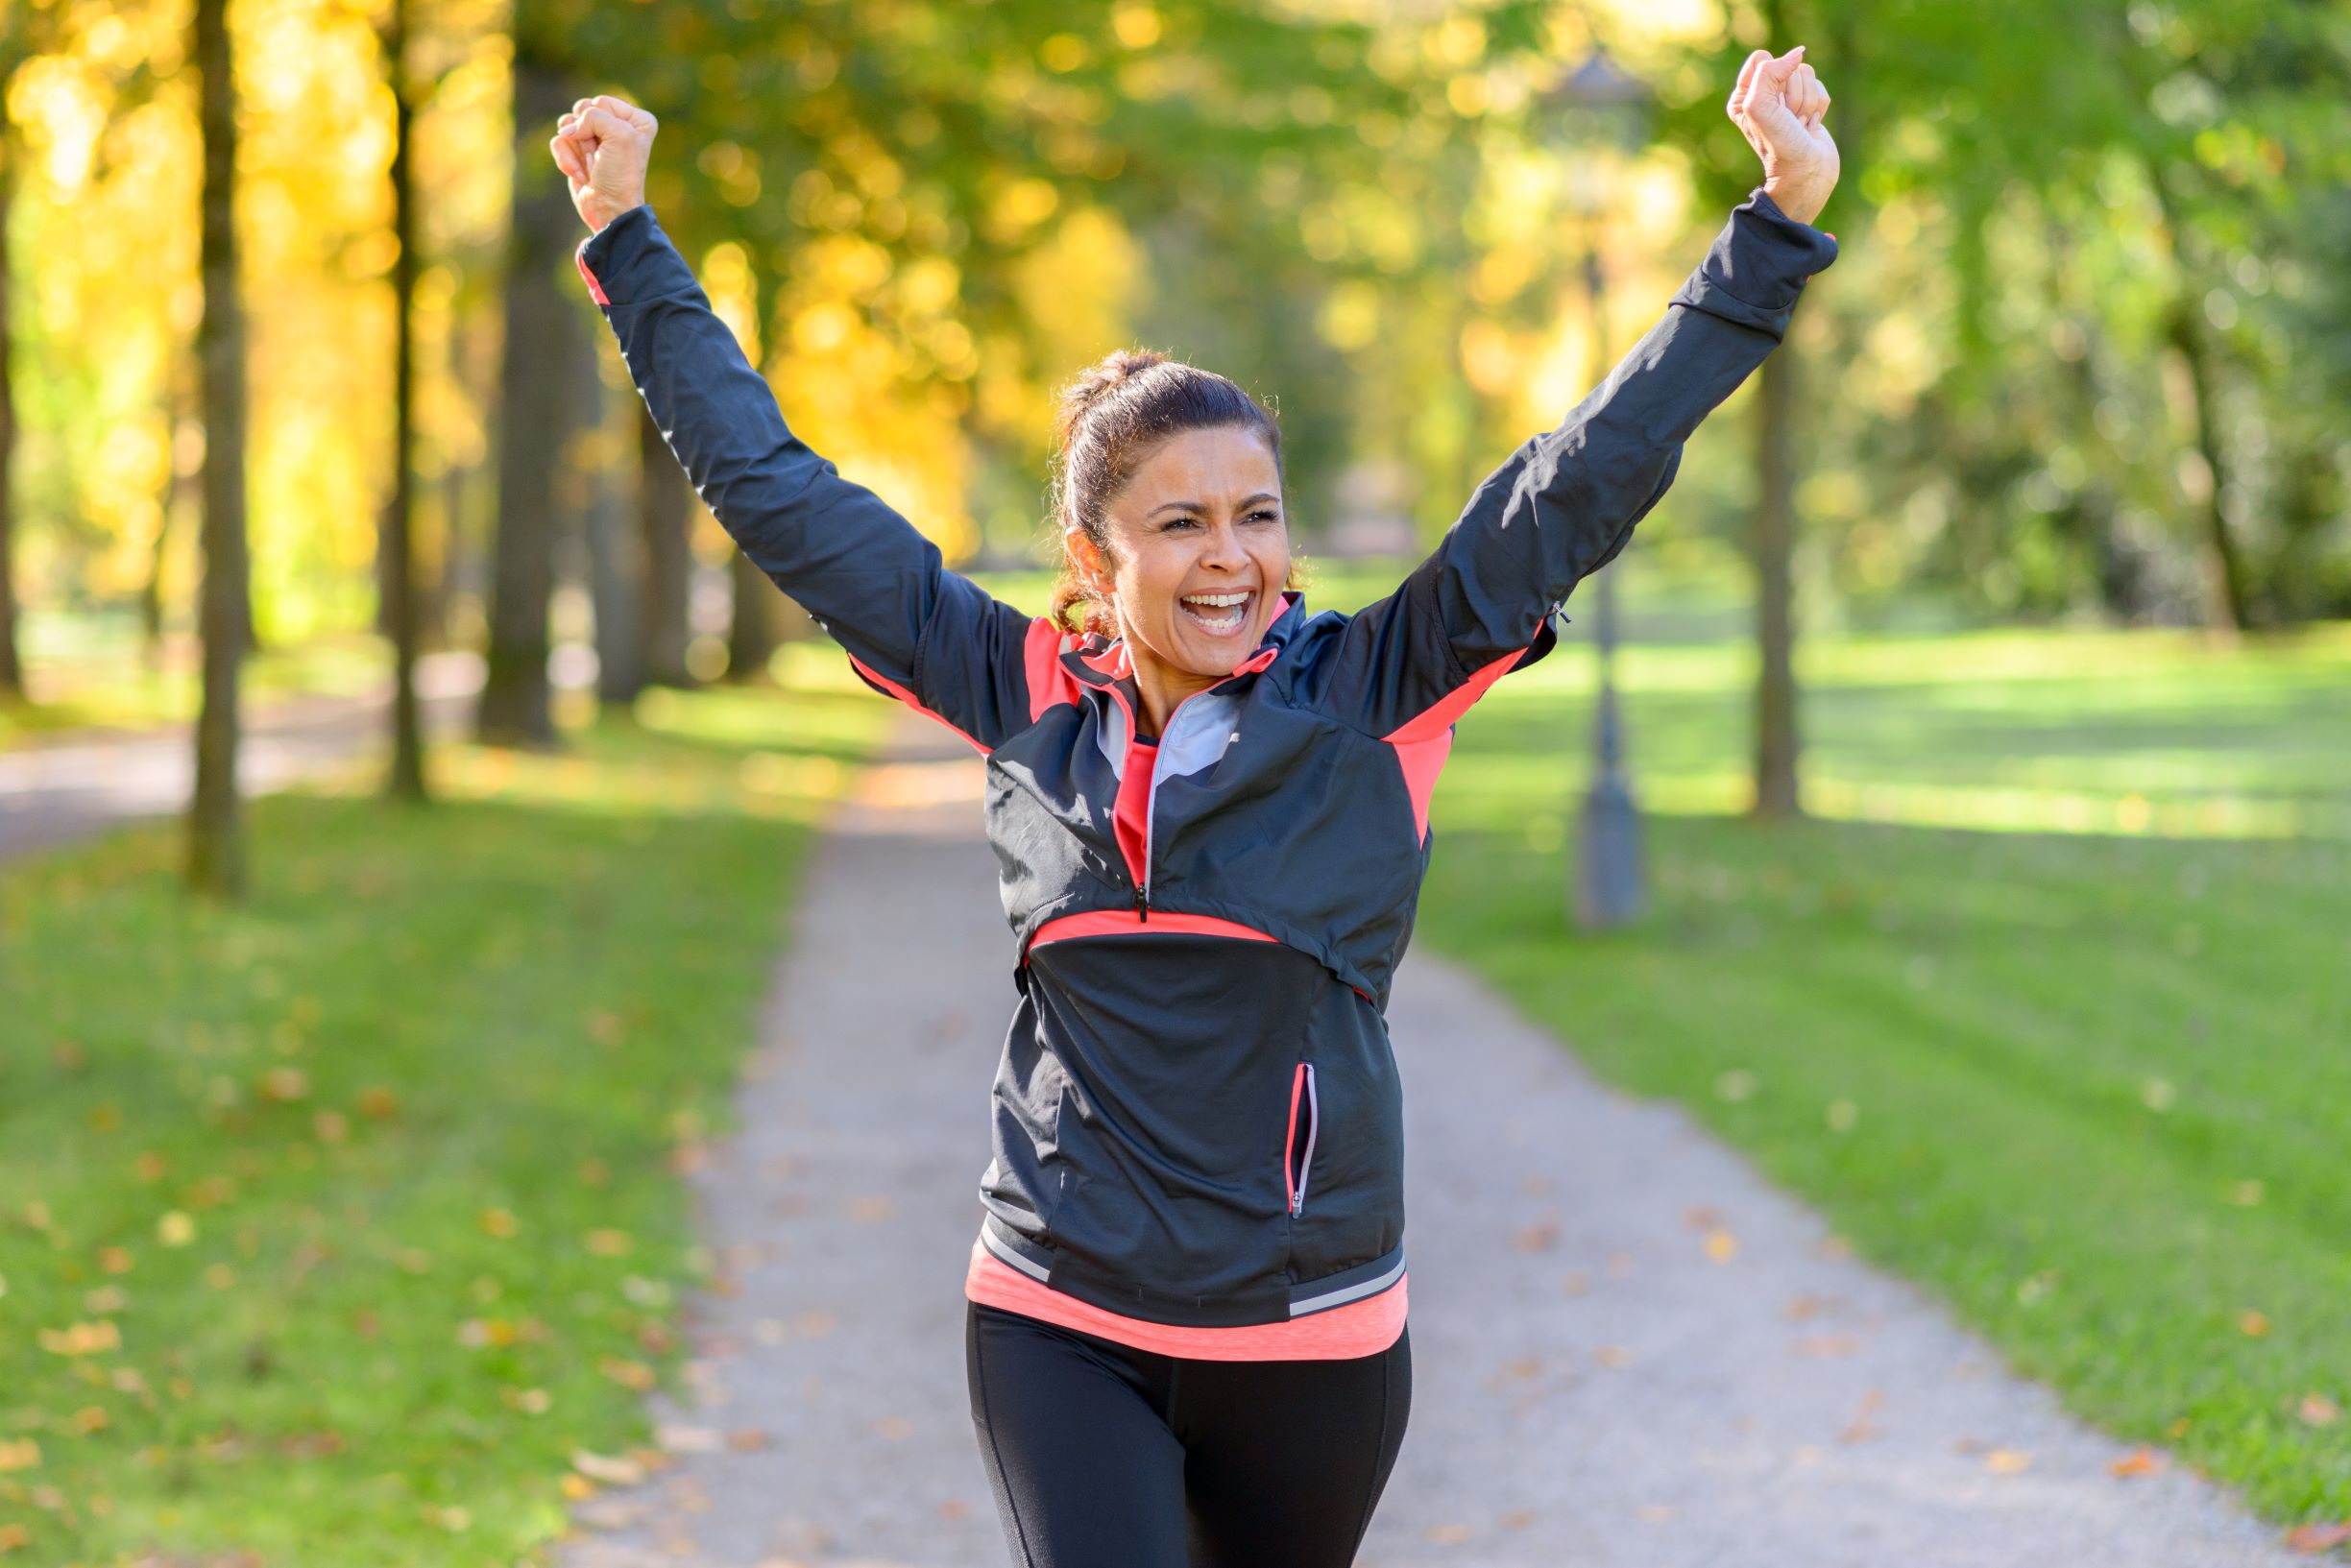 There are many fun ways to walk for heart health. In this image, a woman is walking in the park while raising her arms in celebration.